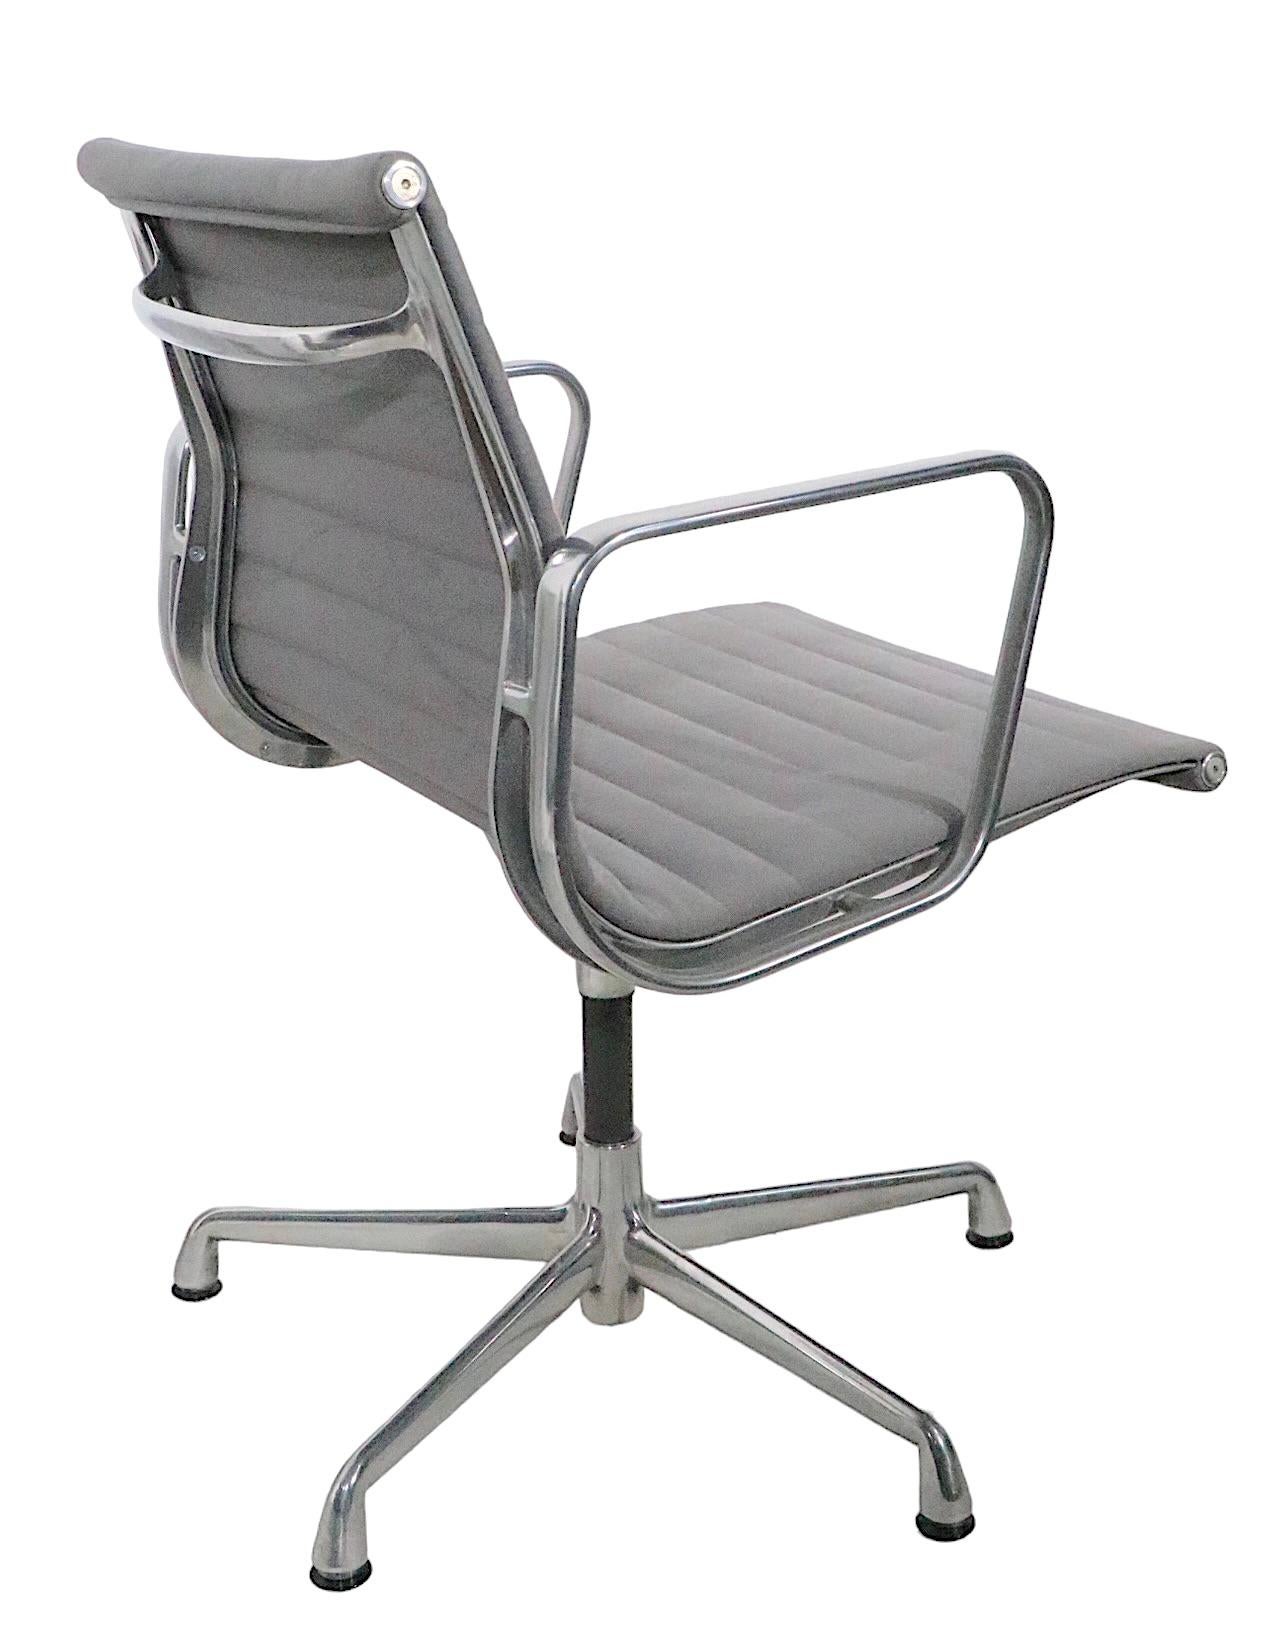 Eames Management Chairs in Grey Fabric Upholstery c. 1980 - 1990s 4 Available  For Sale 1